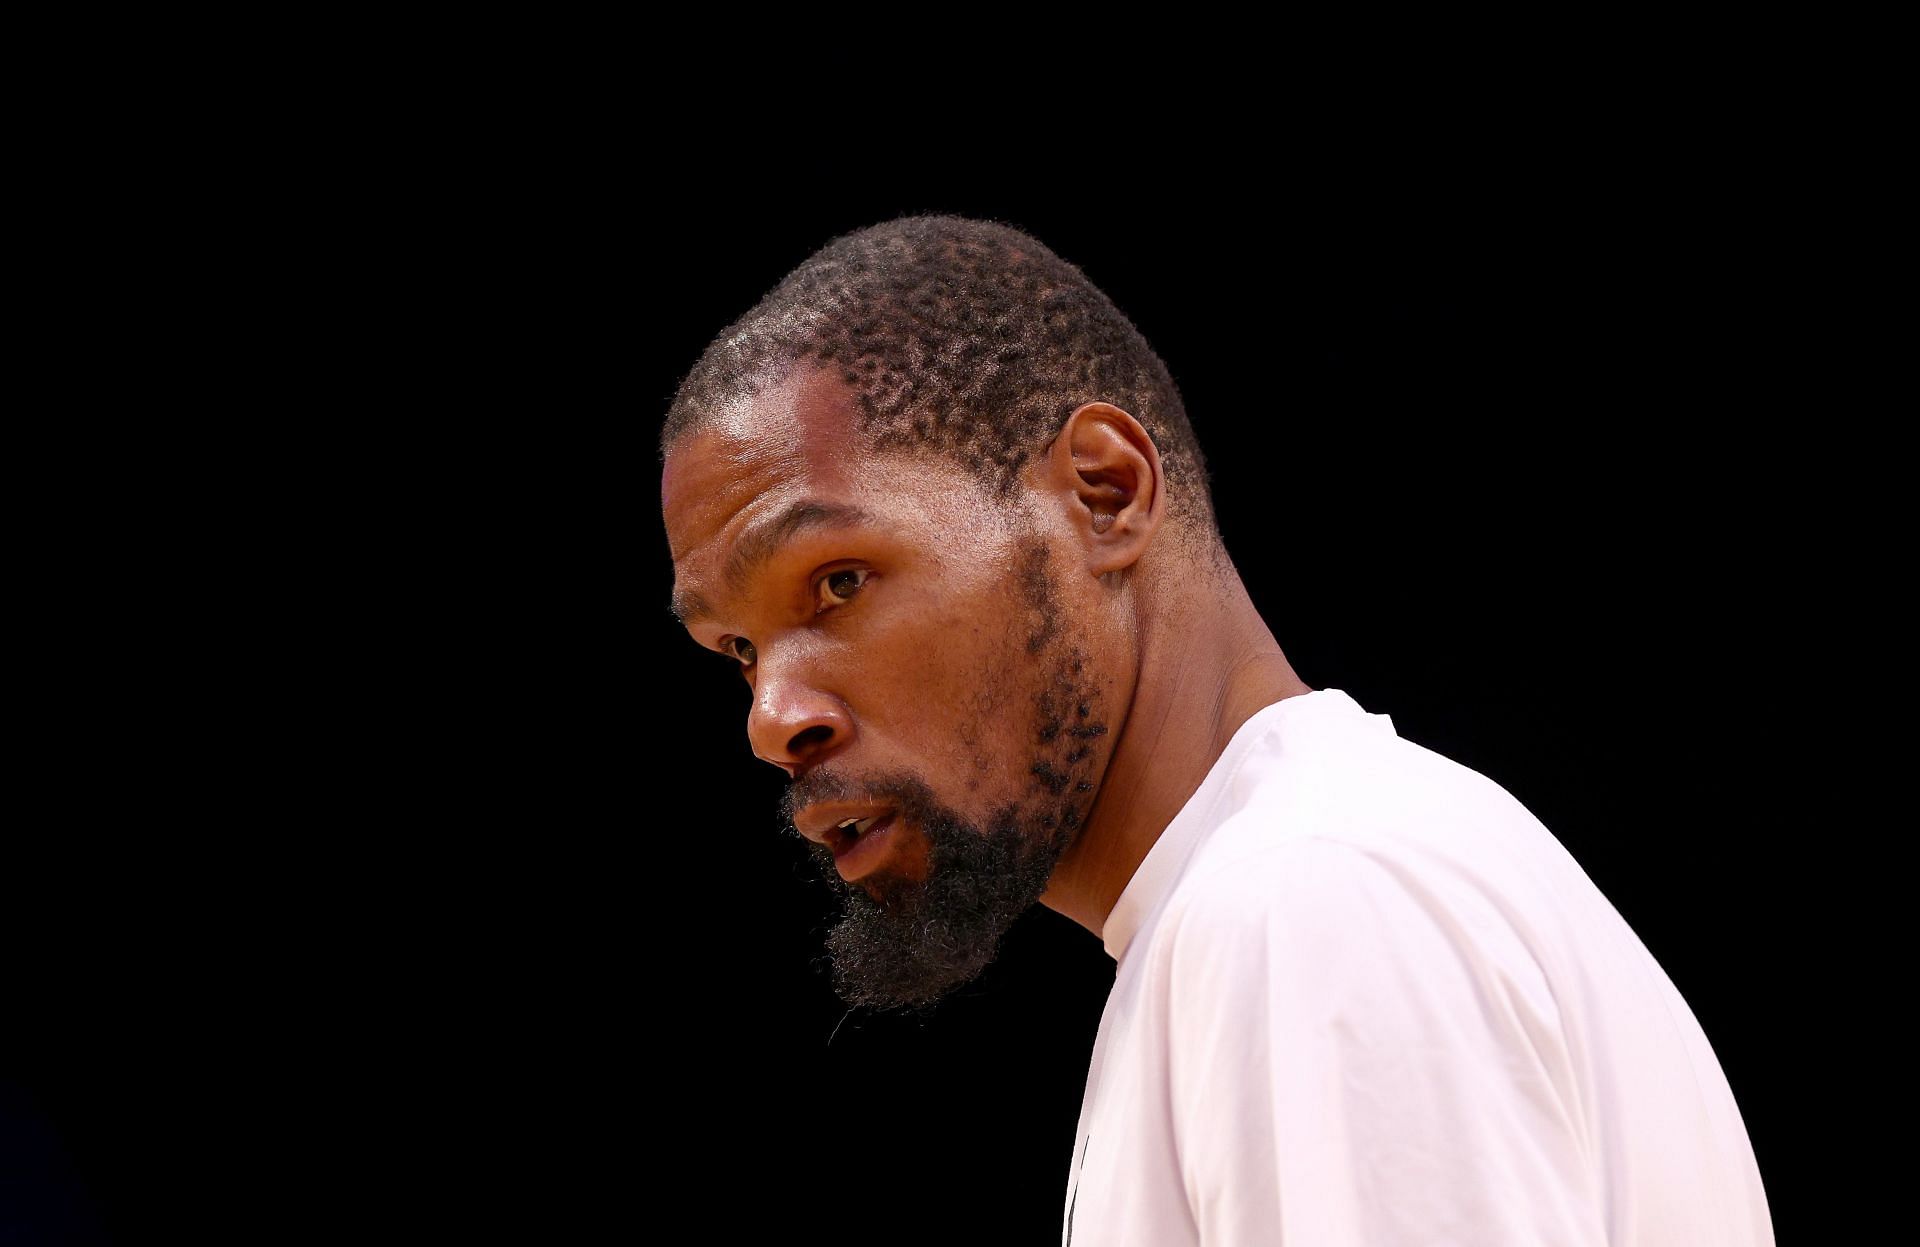 Kevin Durant during the Boston Celtics v Brooklyn Nets - Game Four